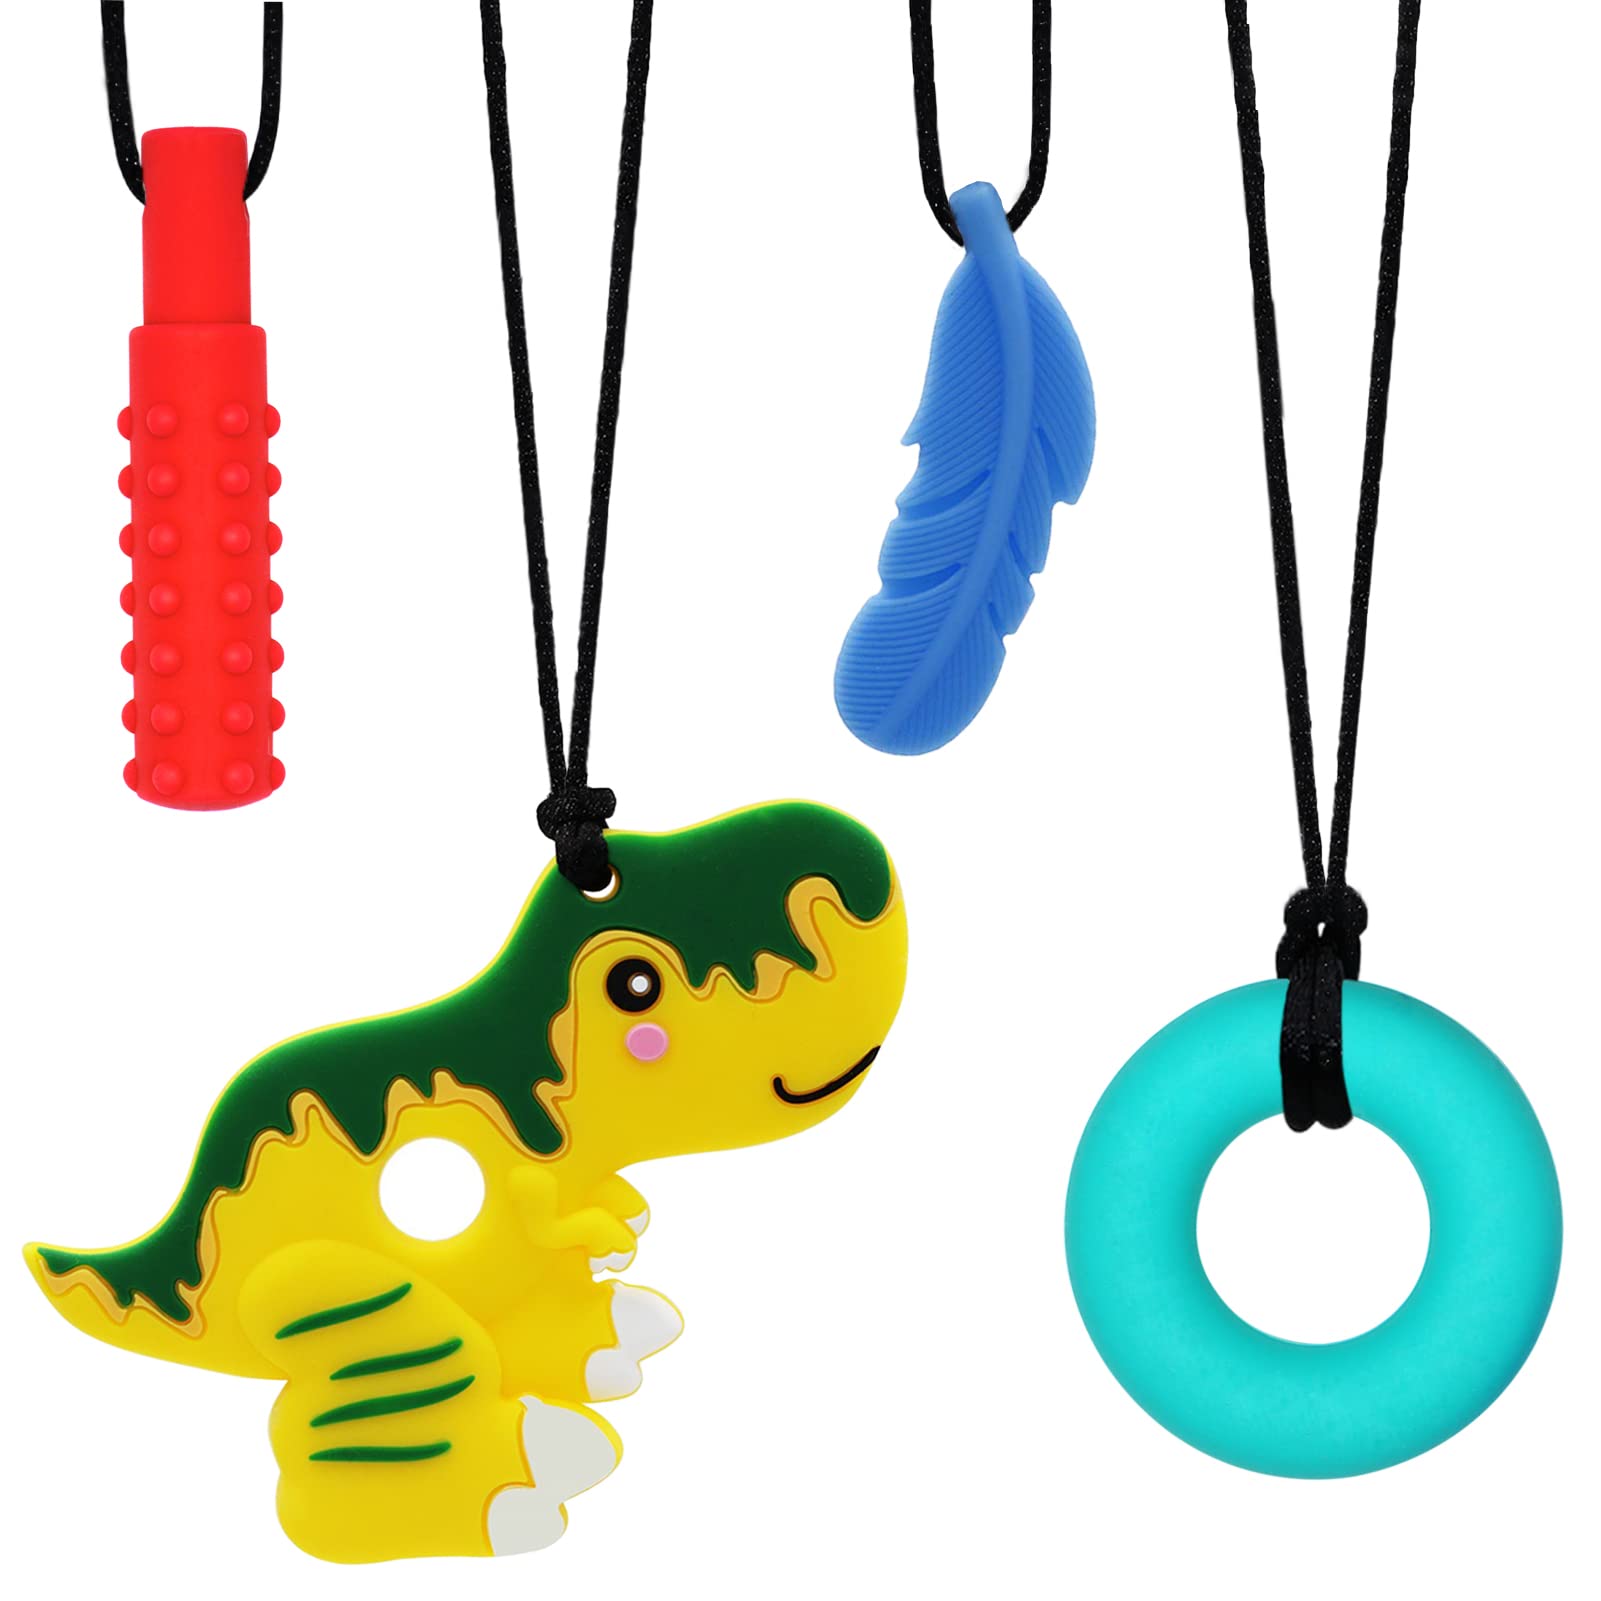 Chew Necklaces for Sensory Kids 4 Pack Chewy Necklace Sensory for Autism  ADHD SPD Teething Anxiety or Special Needs Silicone Oral Chew Toys Therapy  Tools Reduce Fidgeting